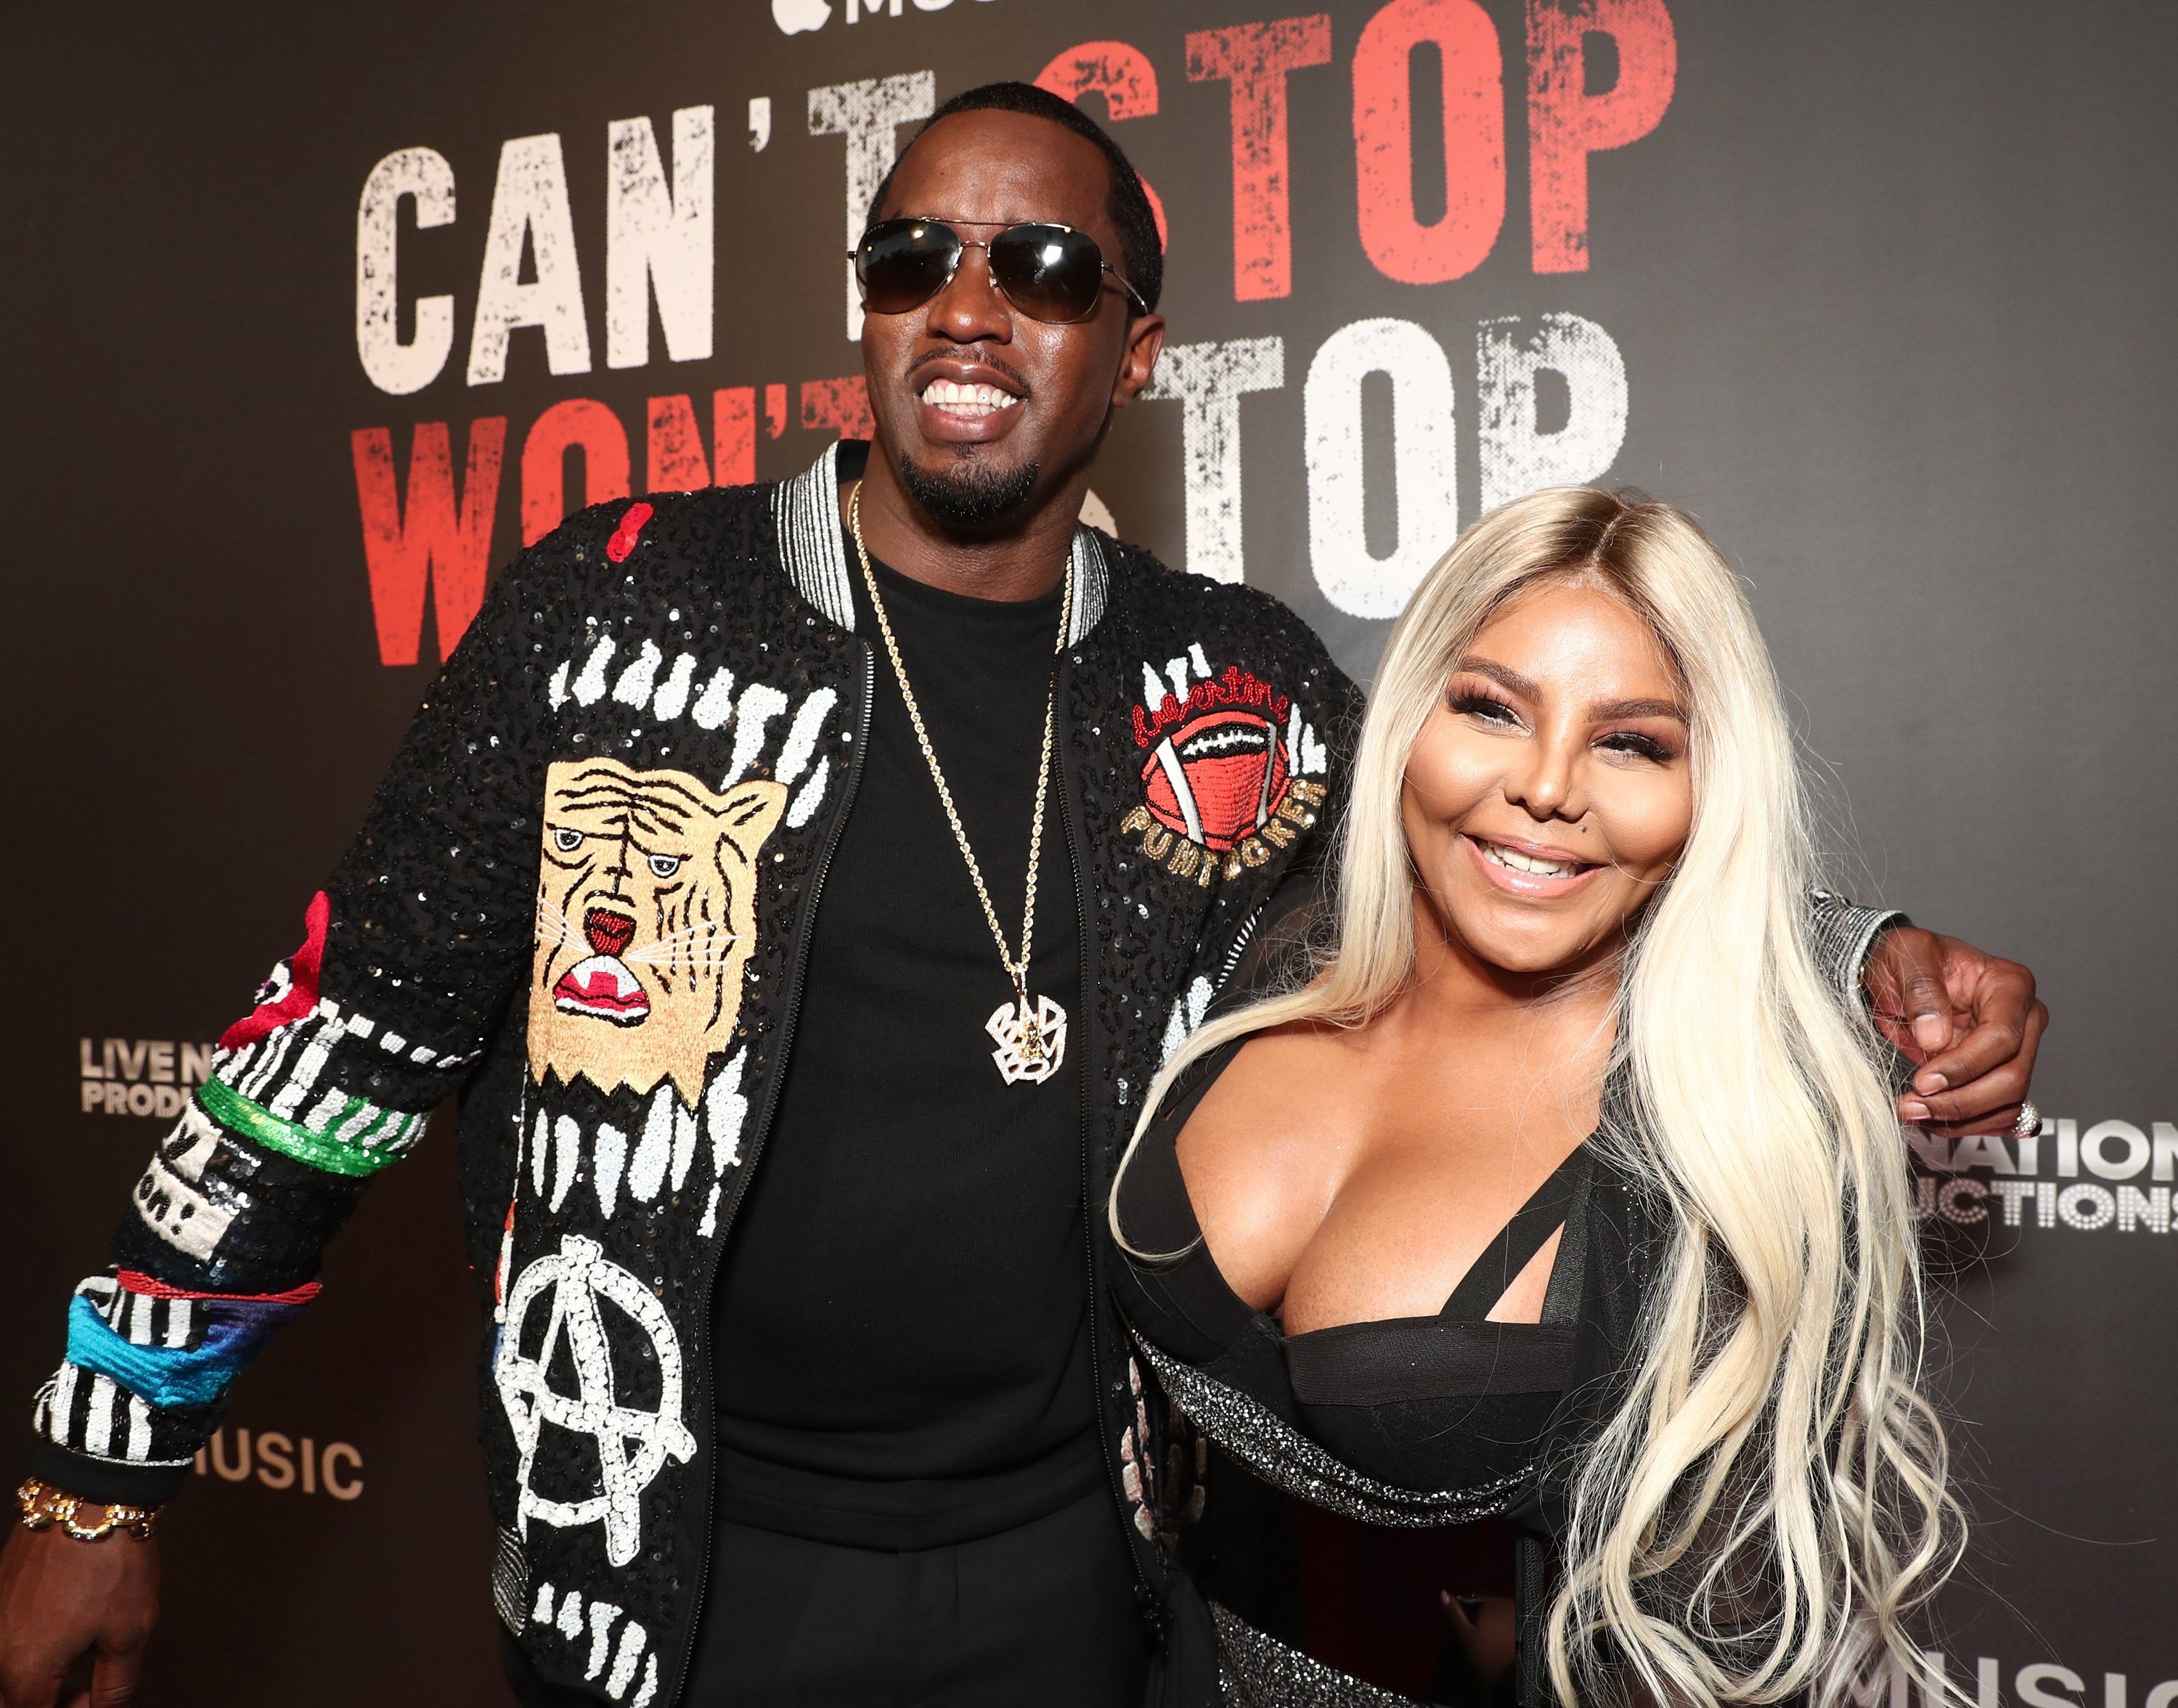 Sean 'Diddy' Combs and Lil' Kim attend the Los Angeles Premiere of "Can't Stop Won't Stop" at the Writers Guild of America